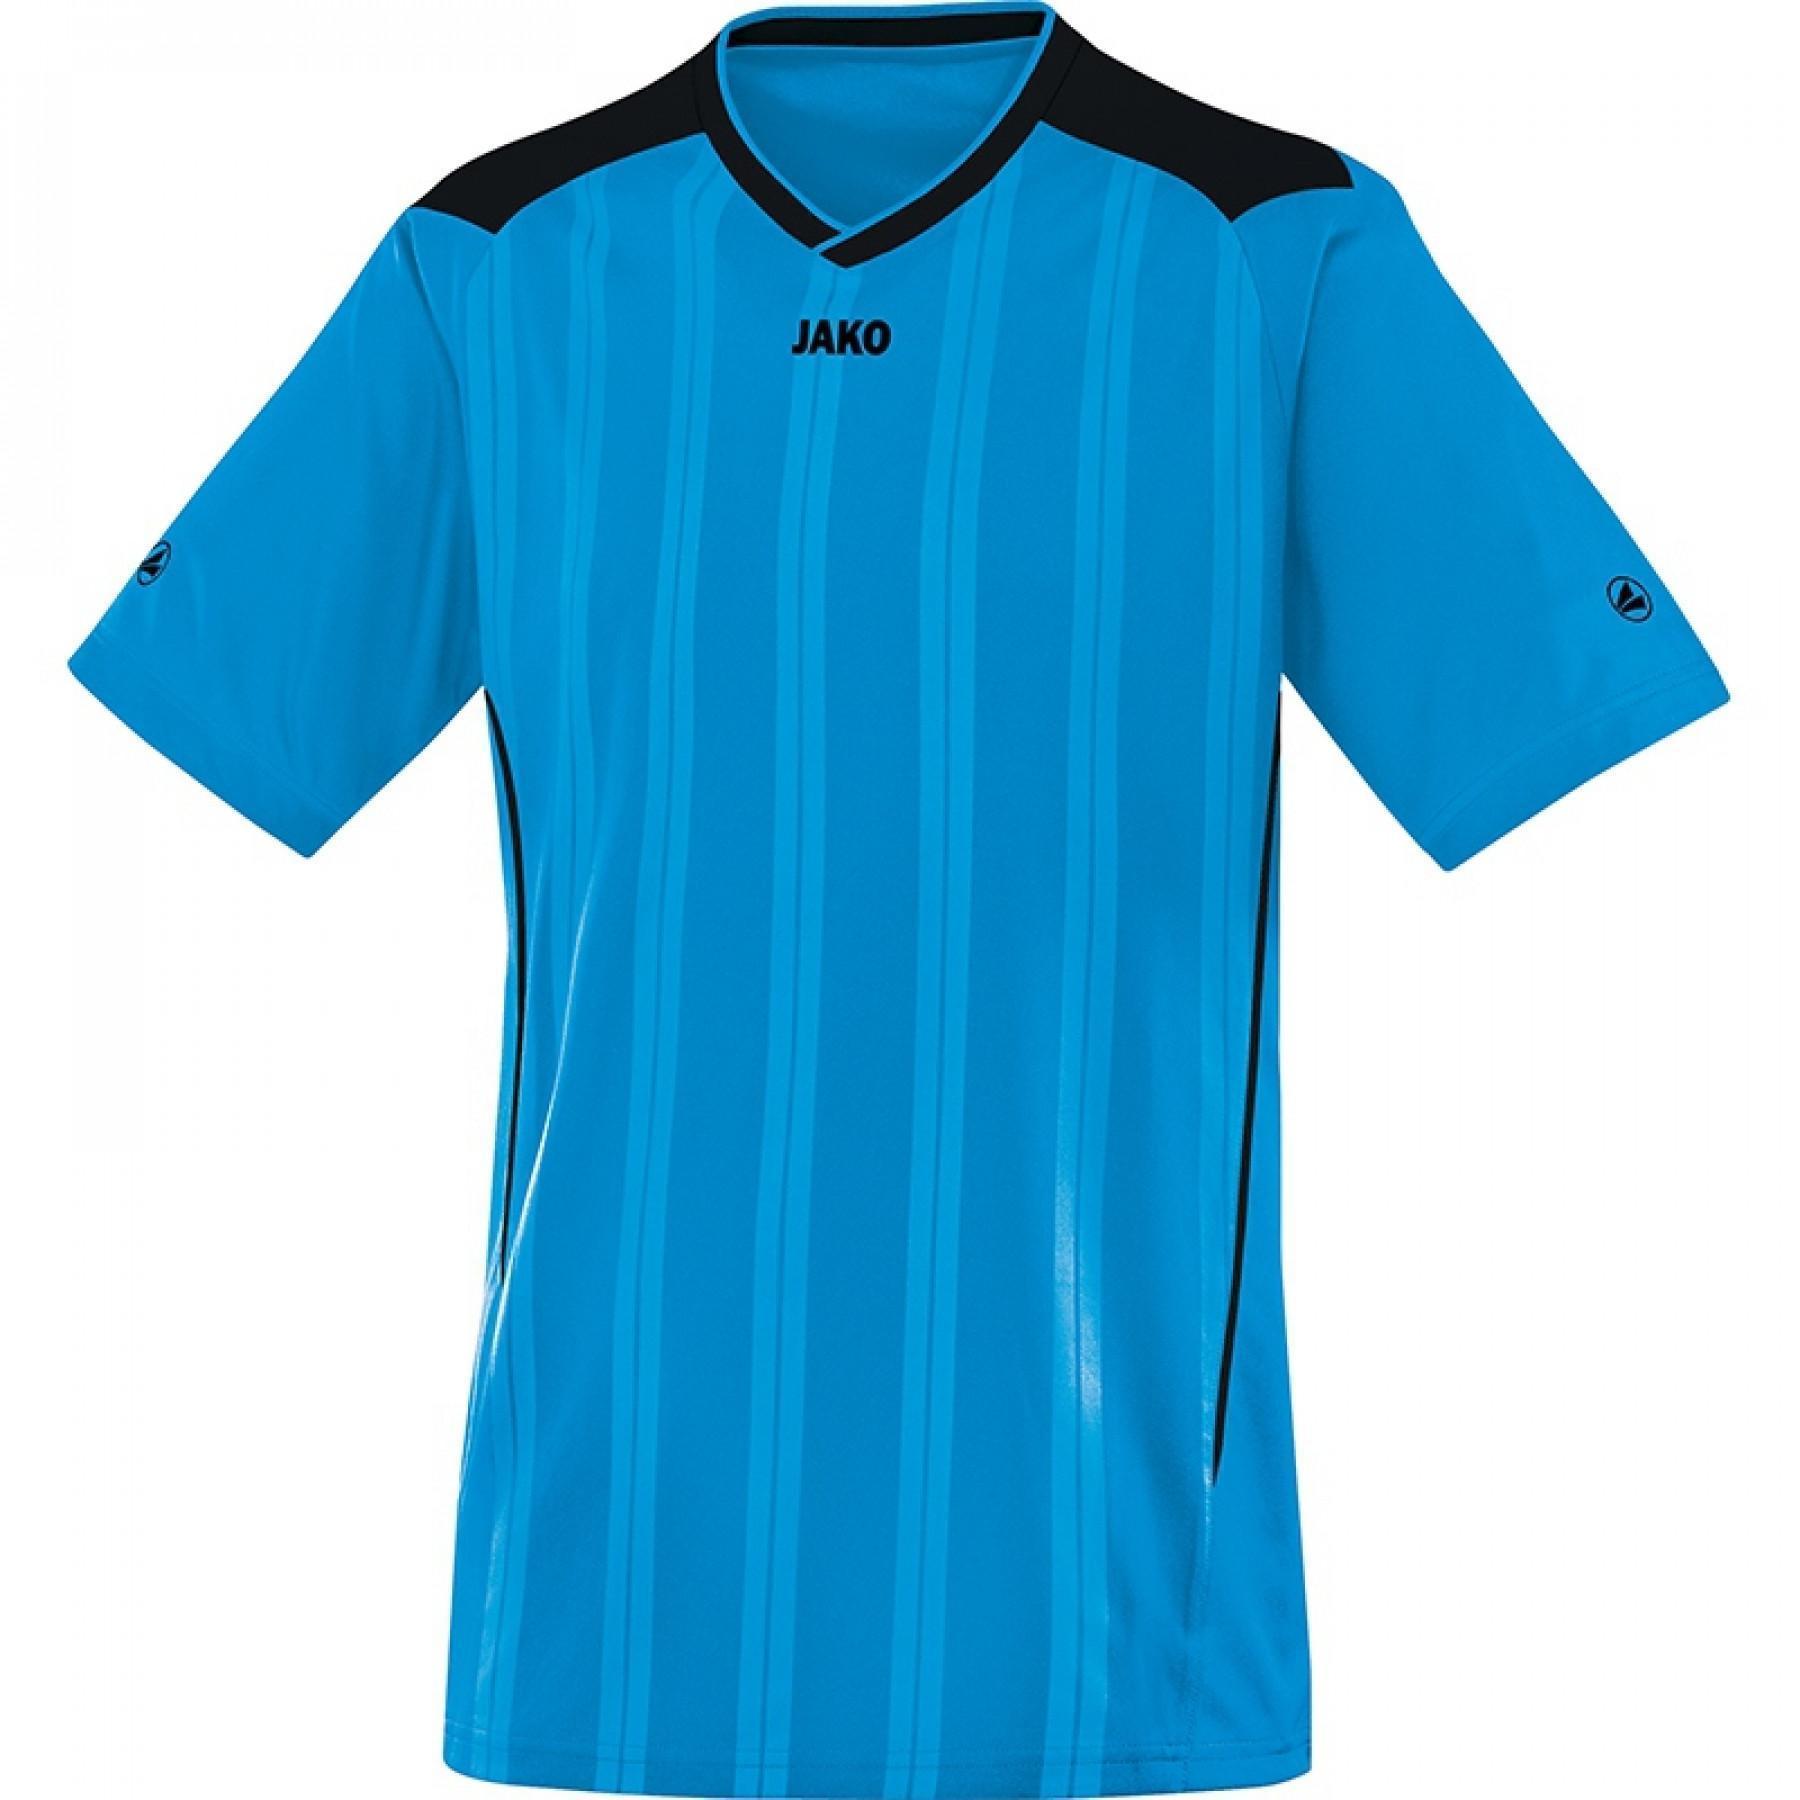 Jersey Jako Cup